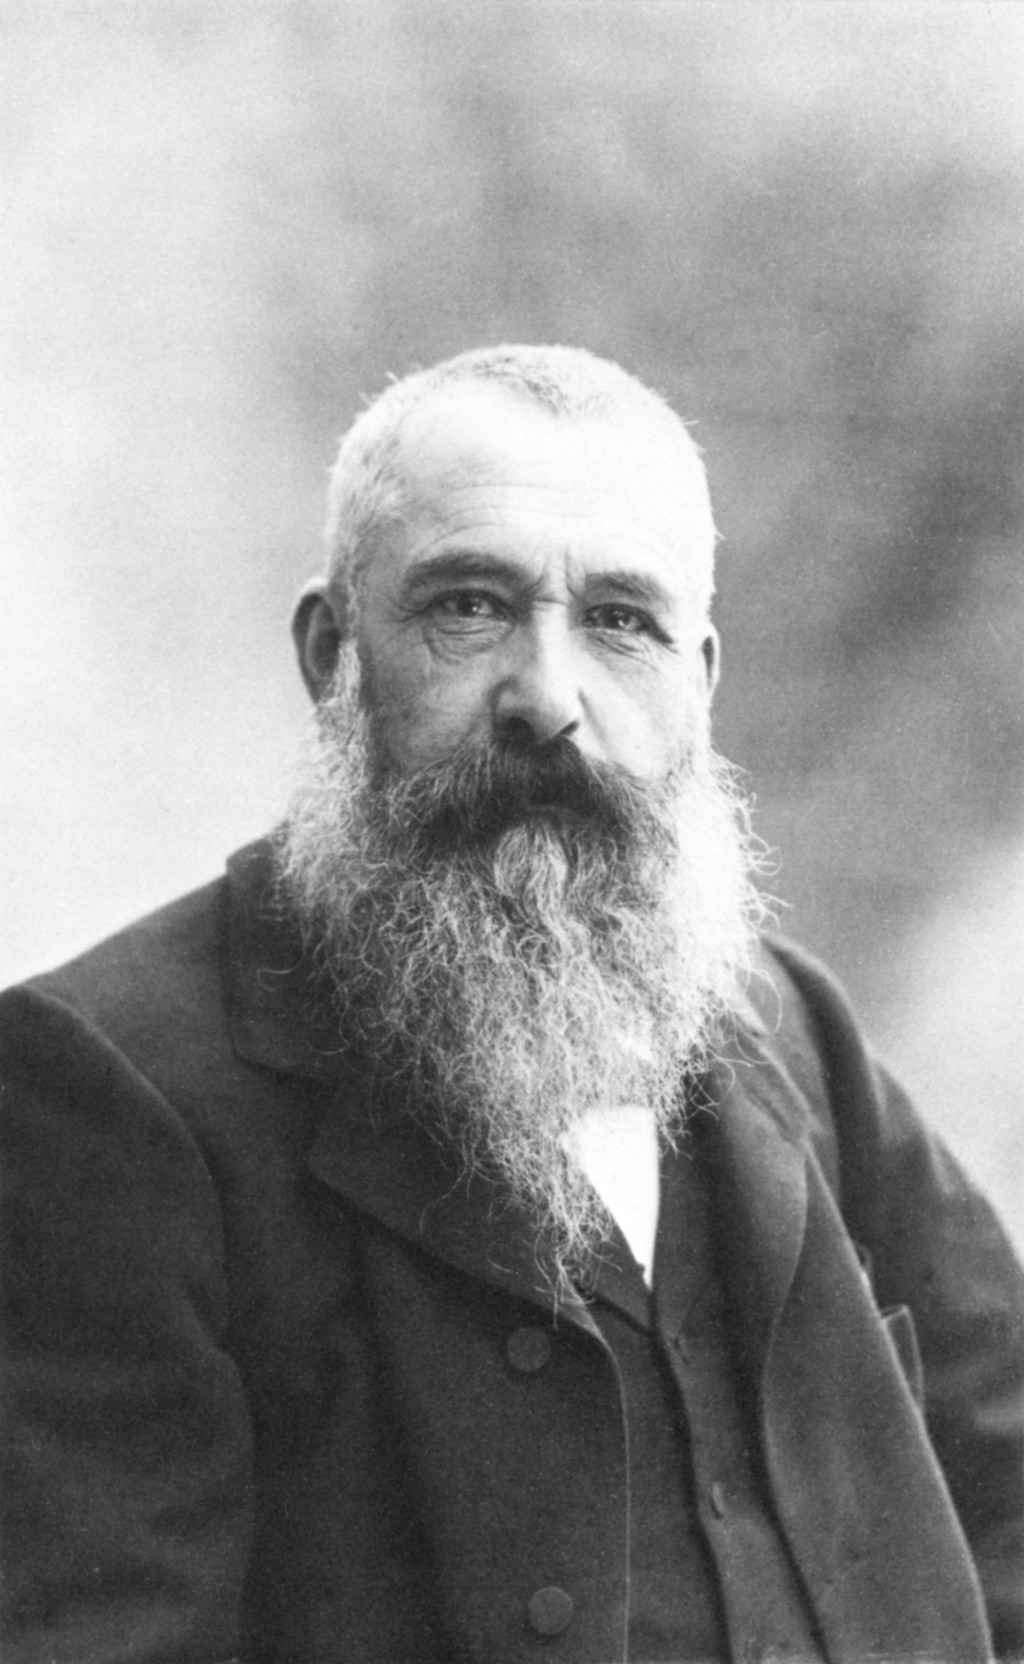 Black and white photograph of Monet